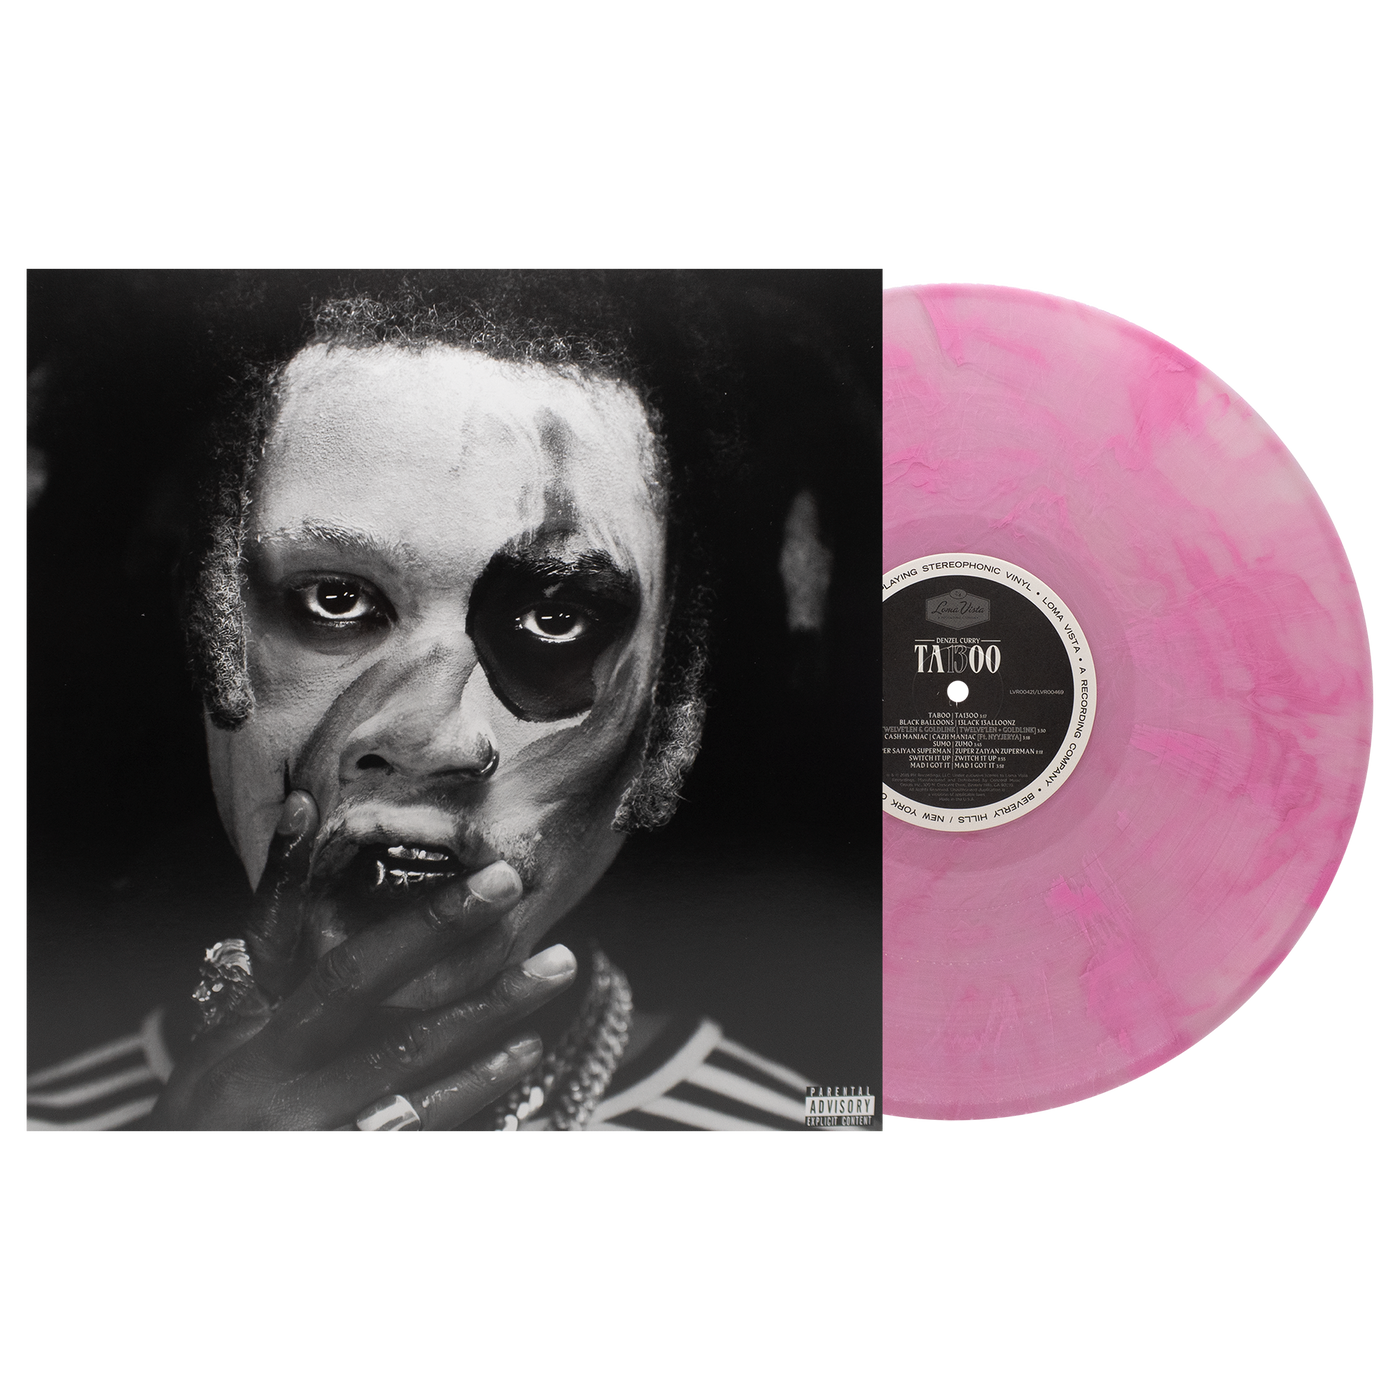 TA1300 Limited Edition "Pink Marble" LP